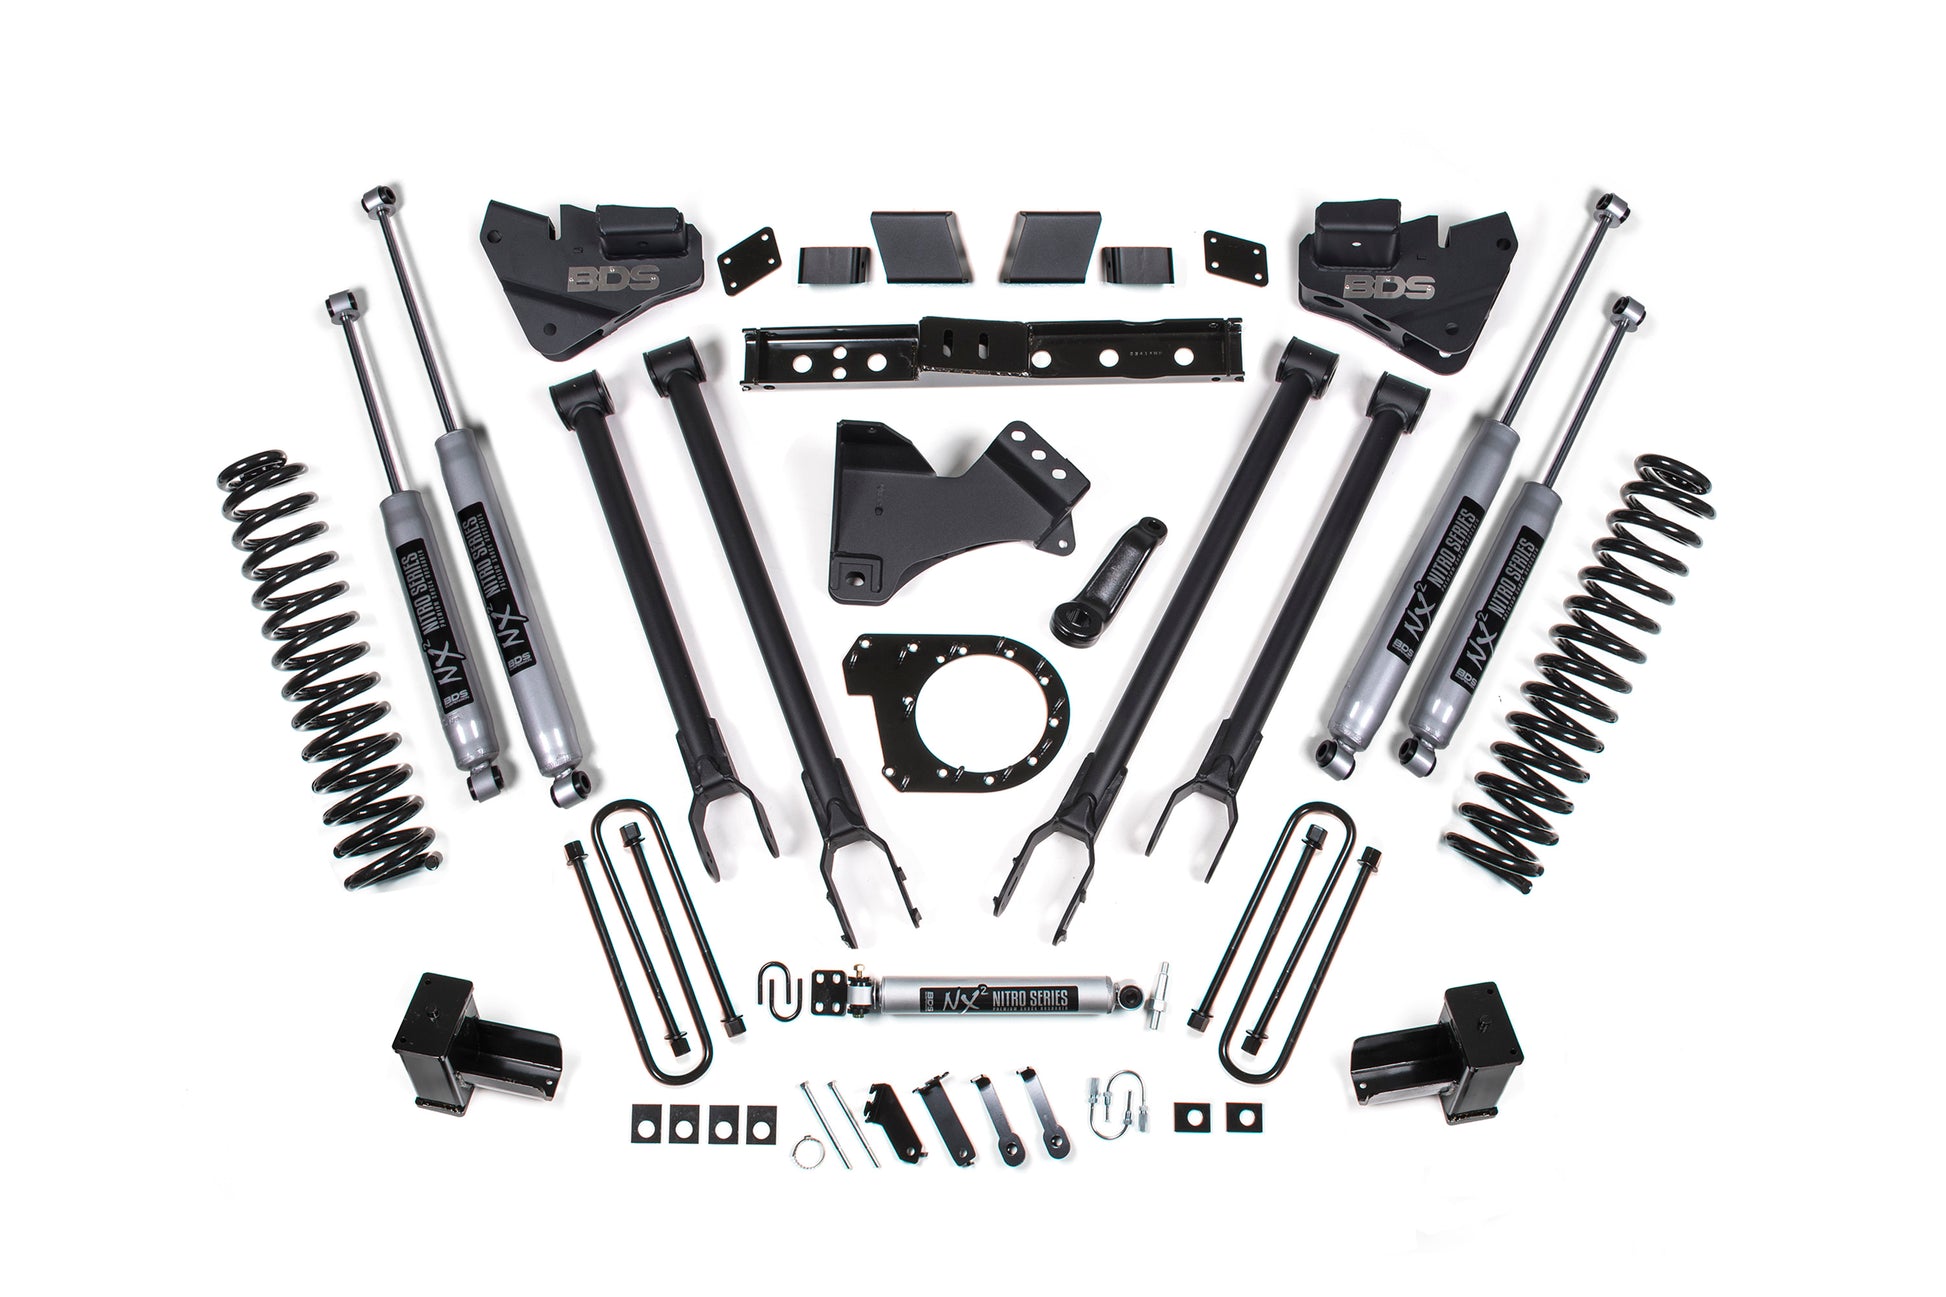 6 Inch Lift Kit - 4-Link Conversion - Ford F250/F350 Super Duty (17-19) 4WD - Diesel - Off-Road Express